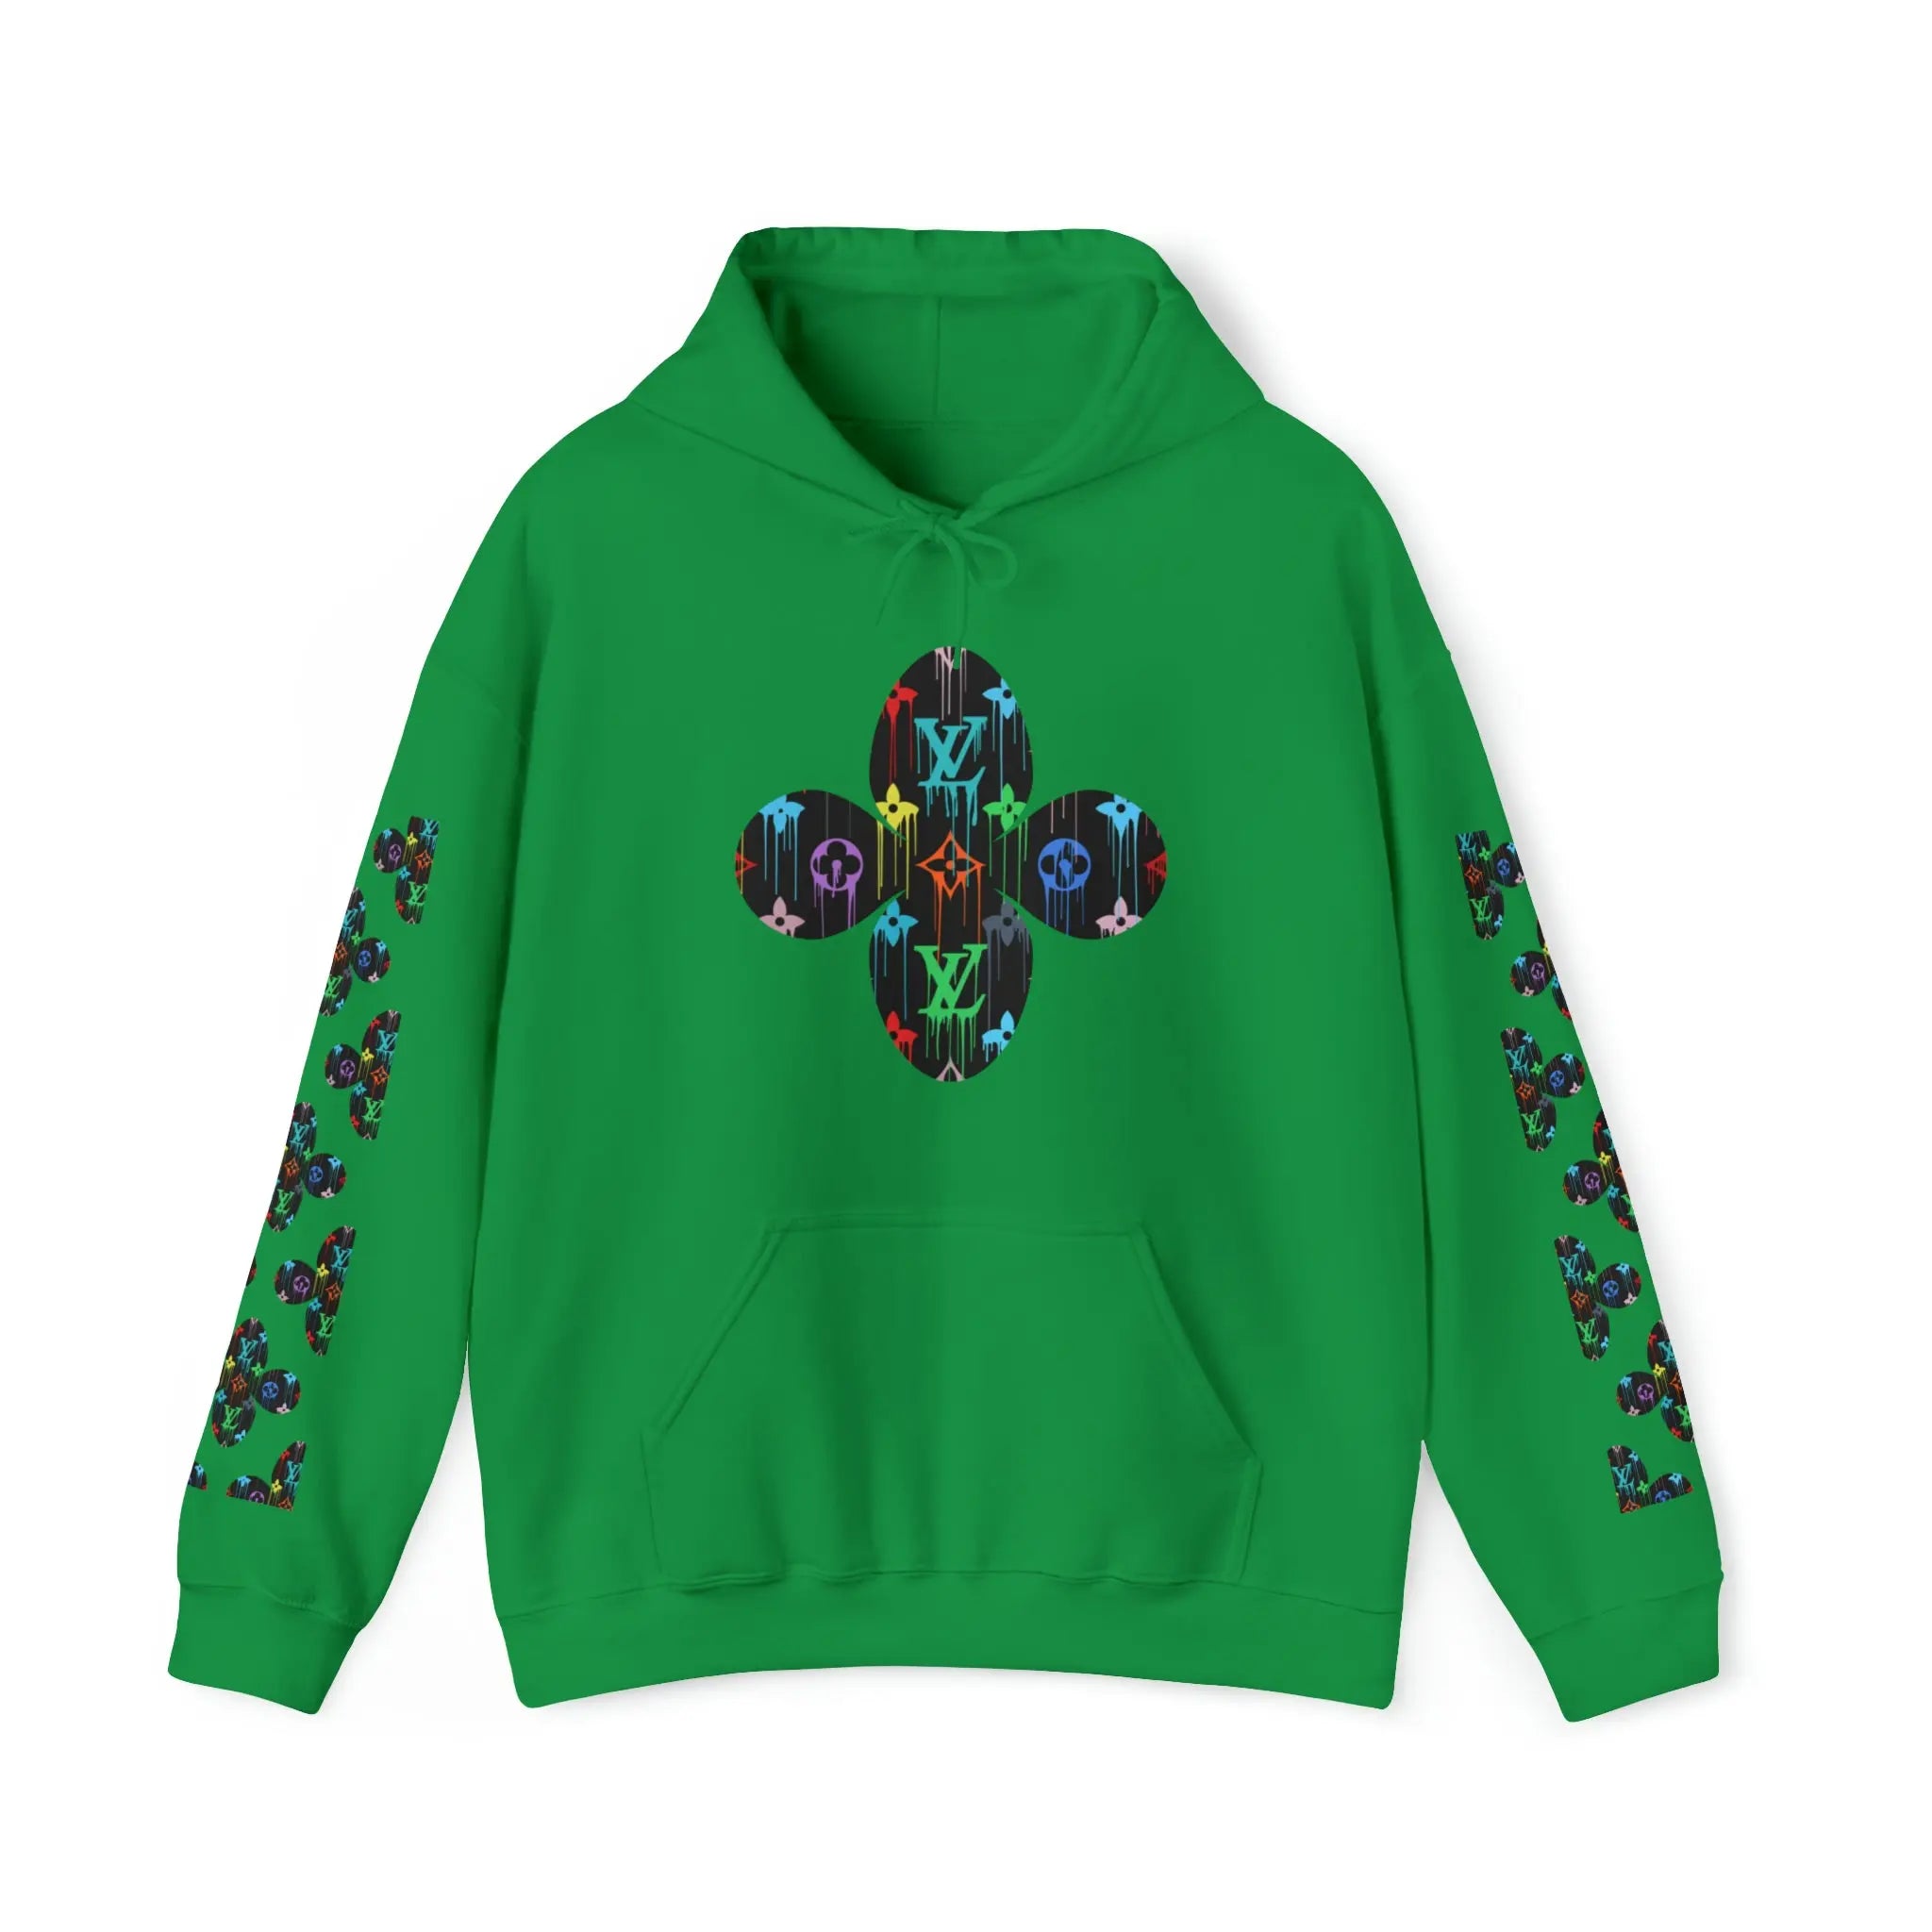  Multi-Colour Dripping Icons Flower with Sleeve Print Unisex Heavy Blend Hooded Sweatshirt HoodieIrishGreen5XL